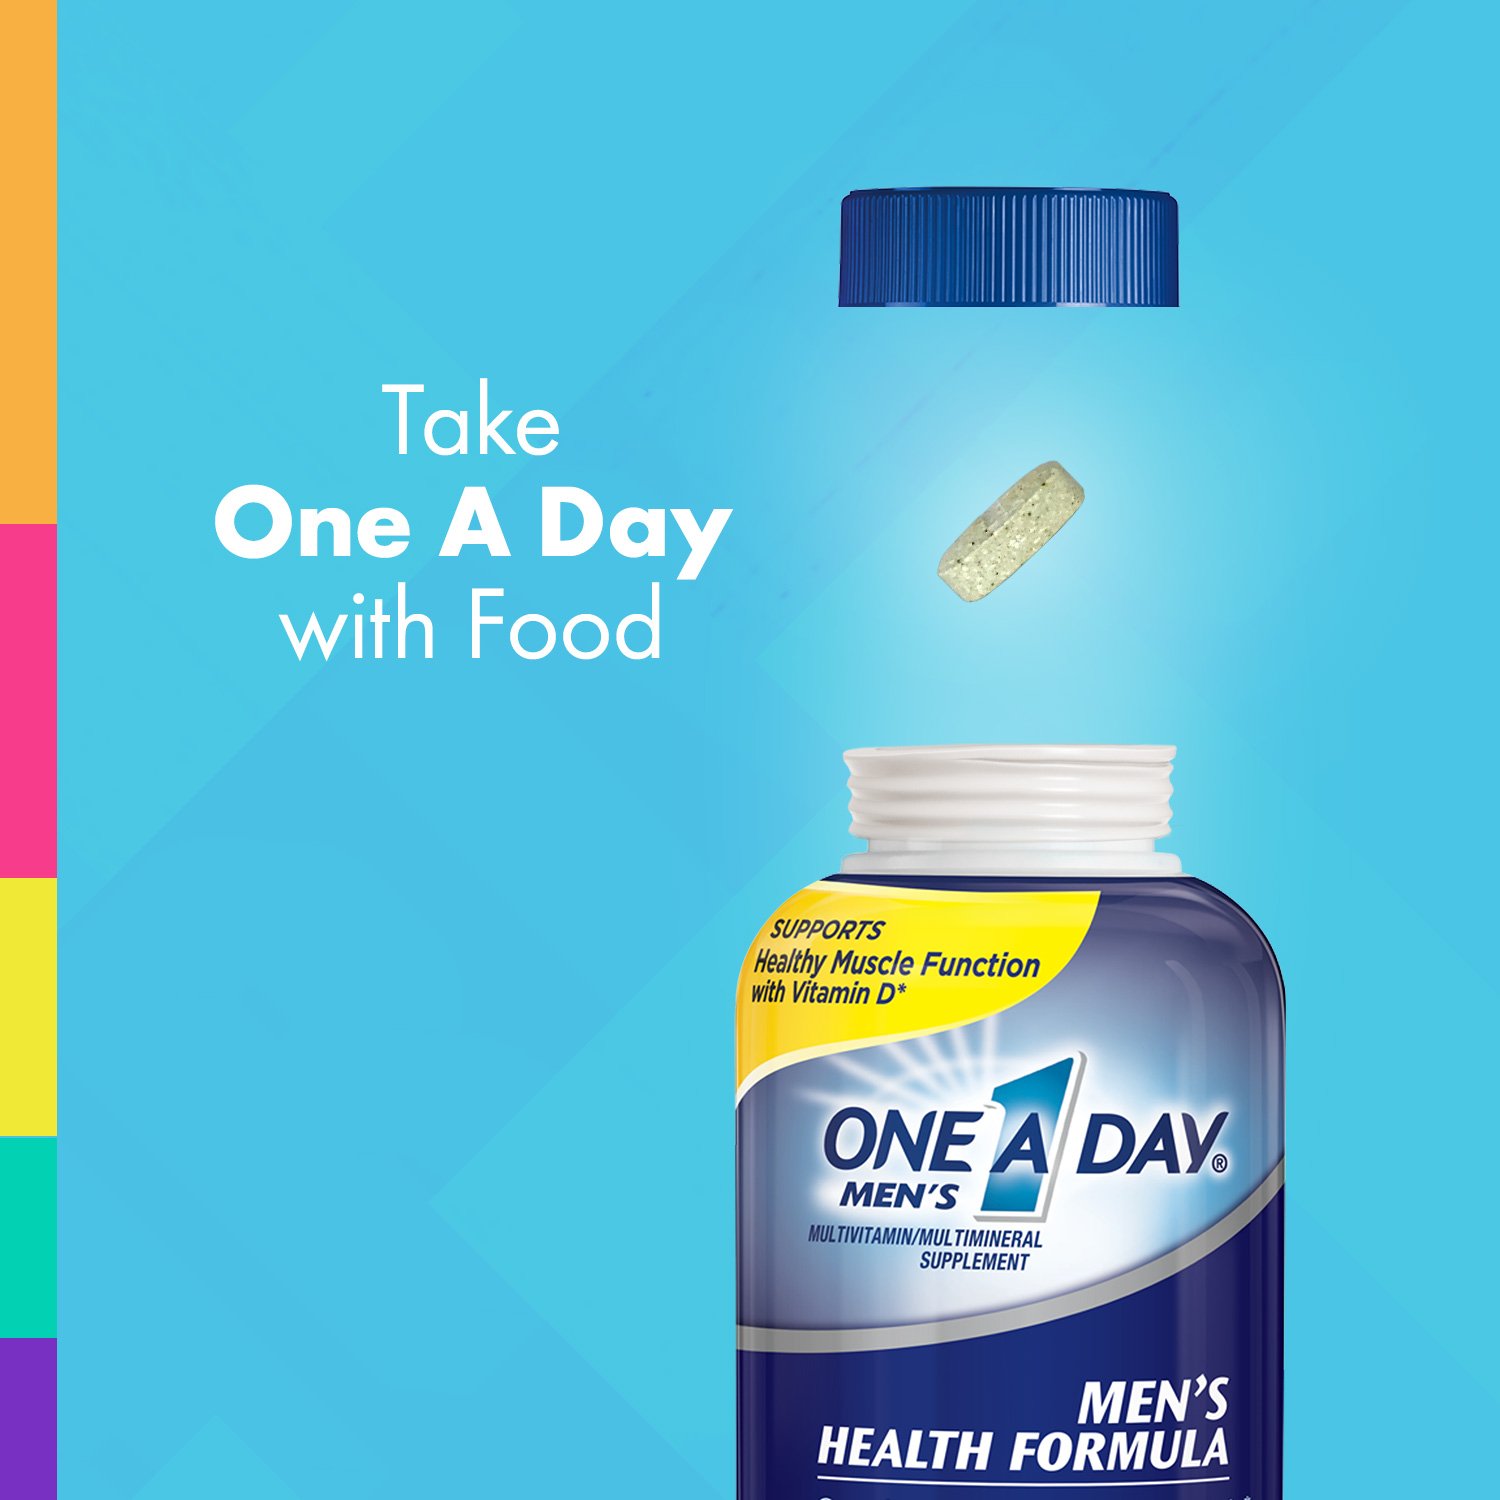 One A Day Pills Multivitamin Multimineral Supplement Tablets